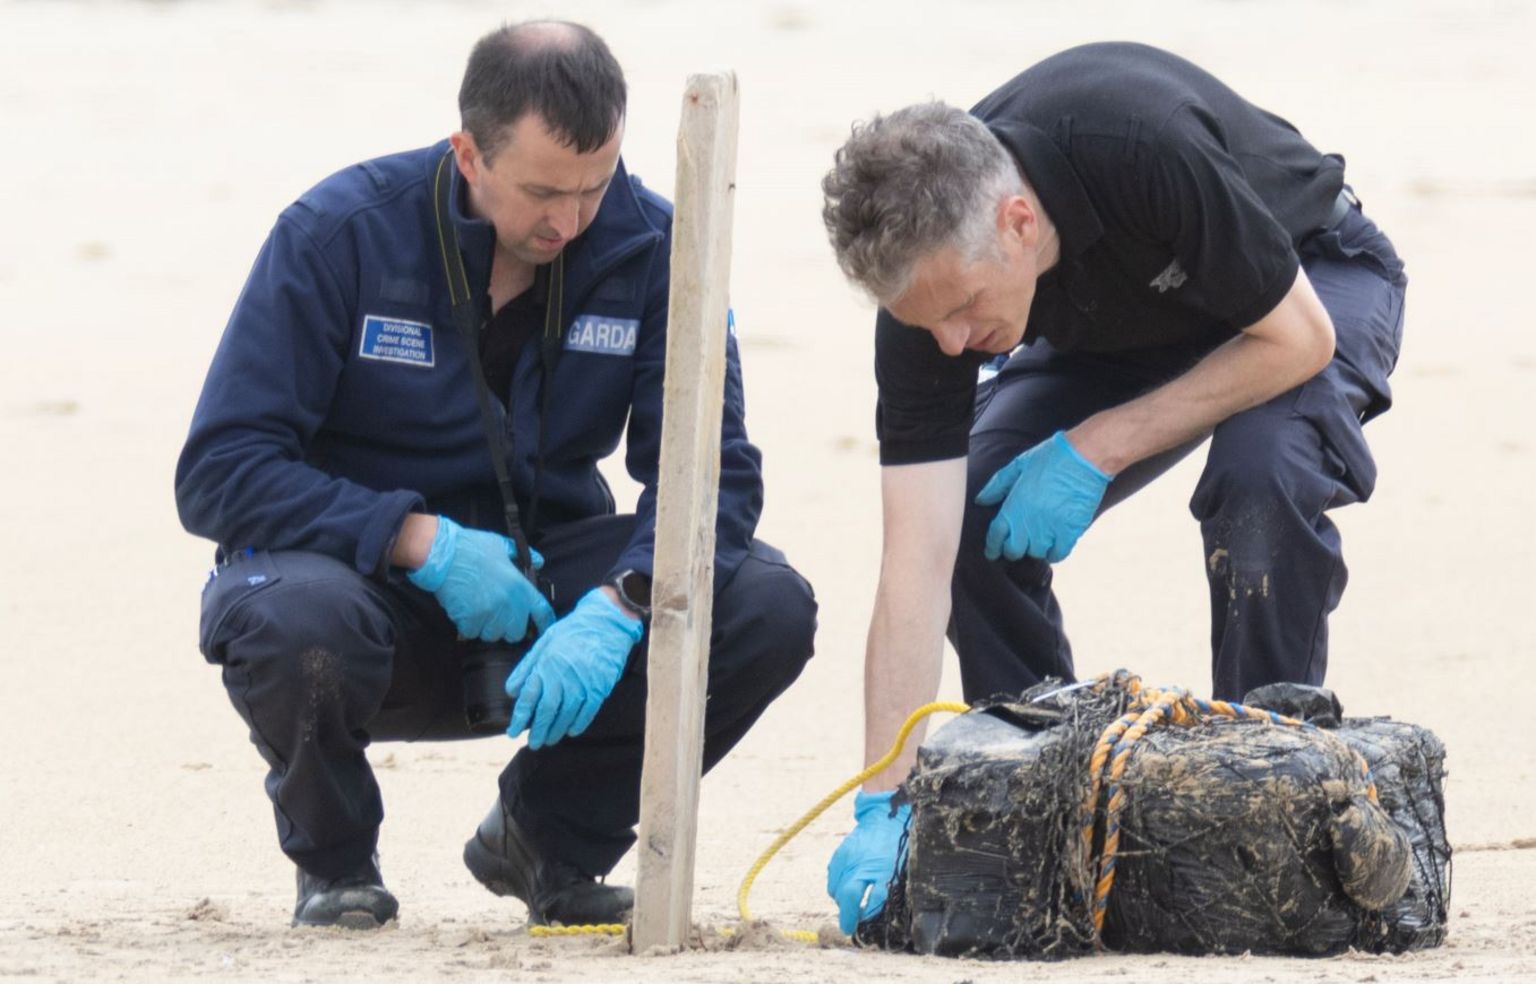 Garda officers examine a packet of suspected cocaine on a Donegal beach